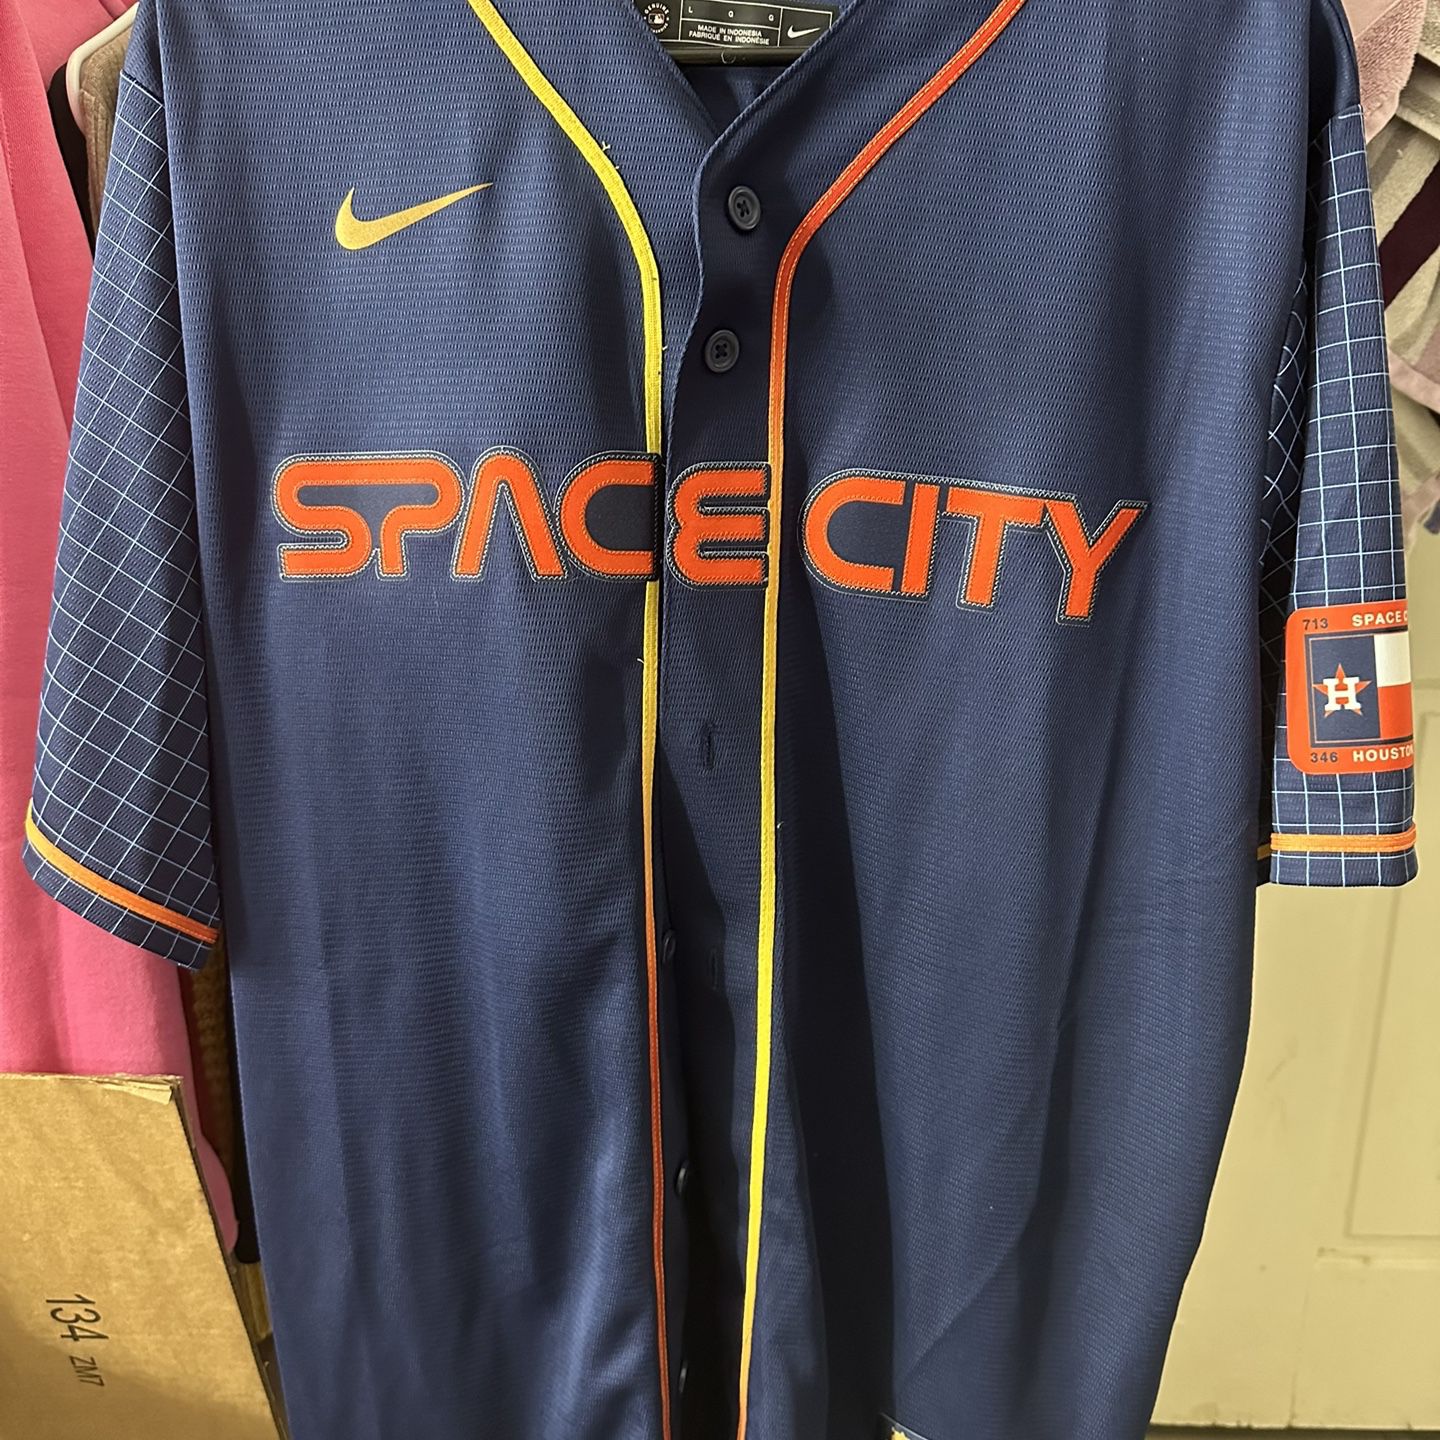 Houston Astros space City Jersey for Sale in Houston, TX - OfferUp